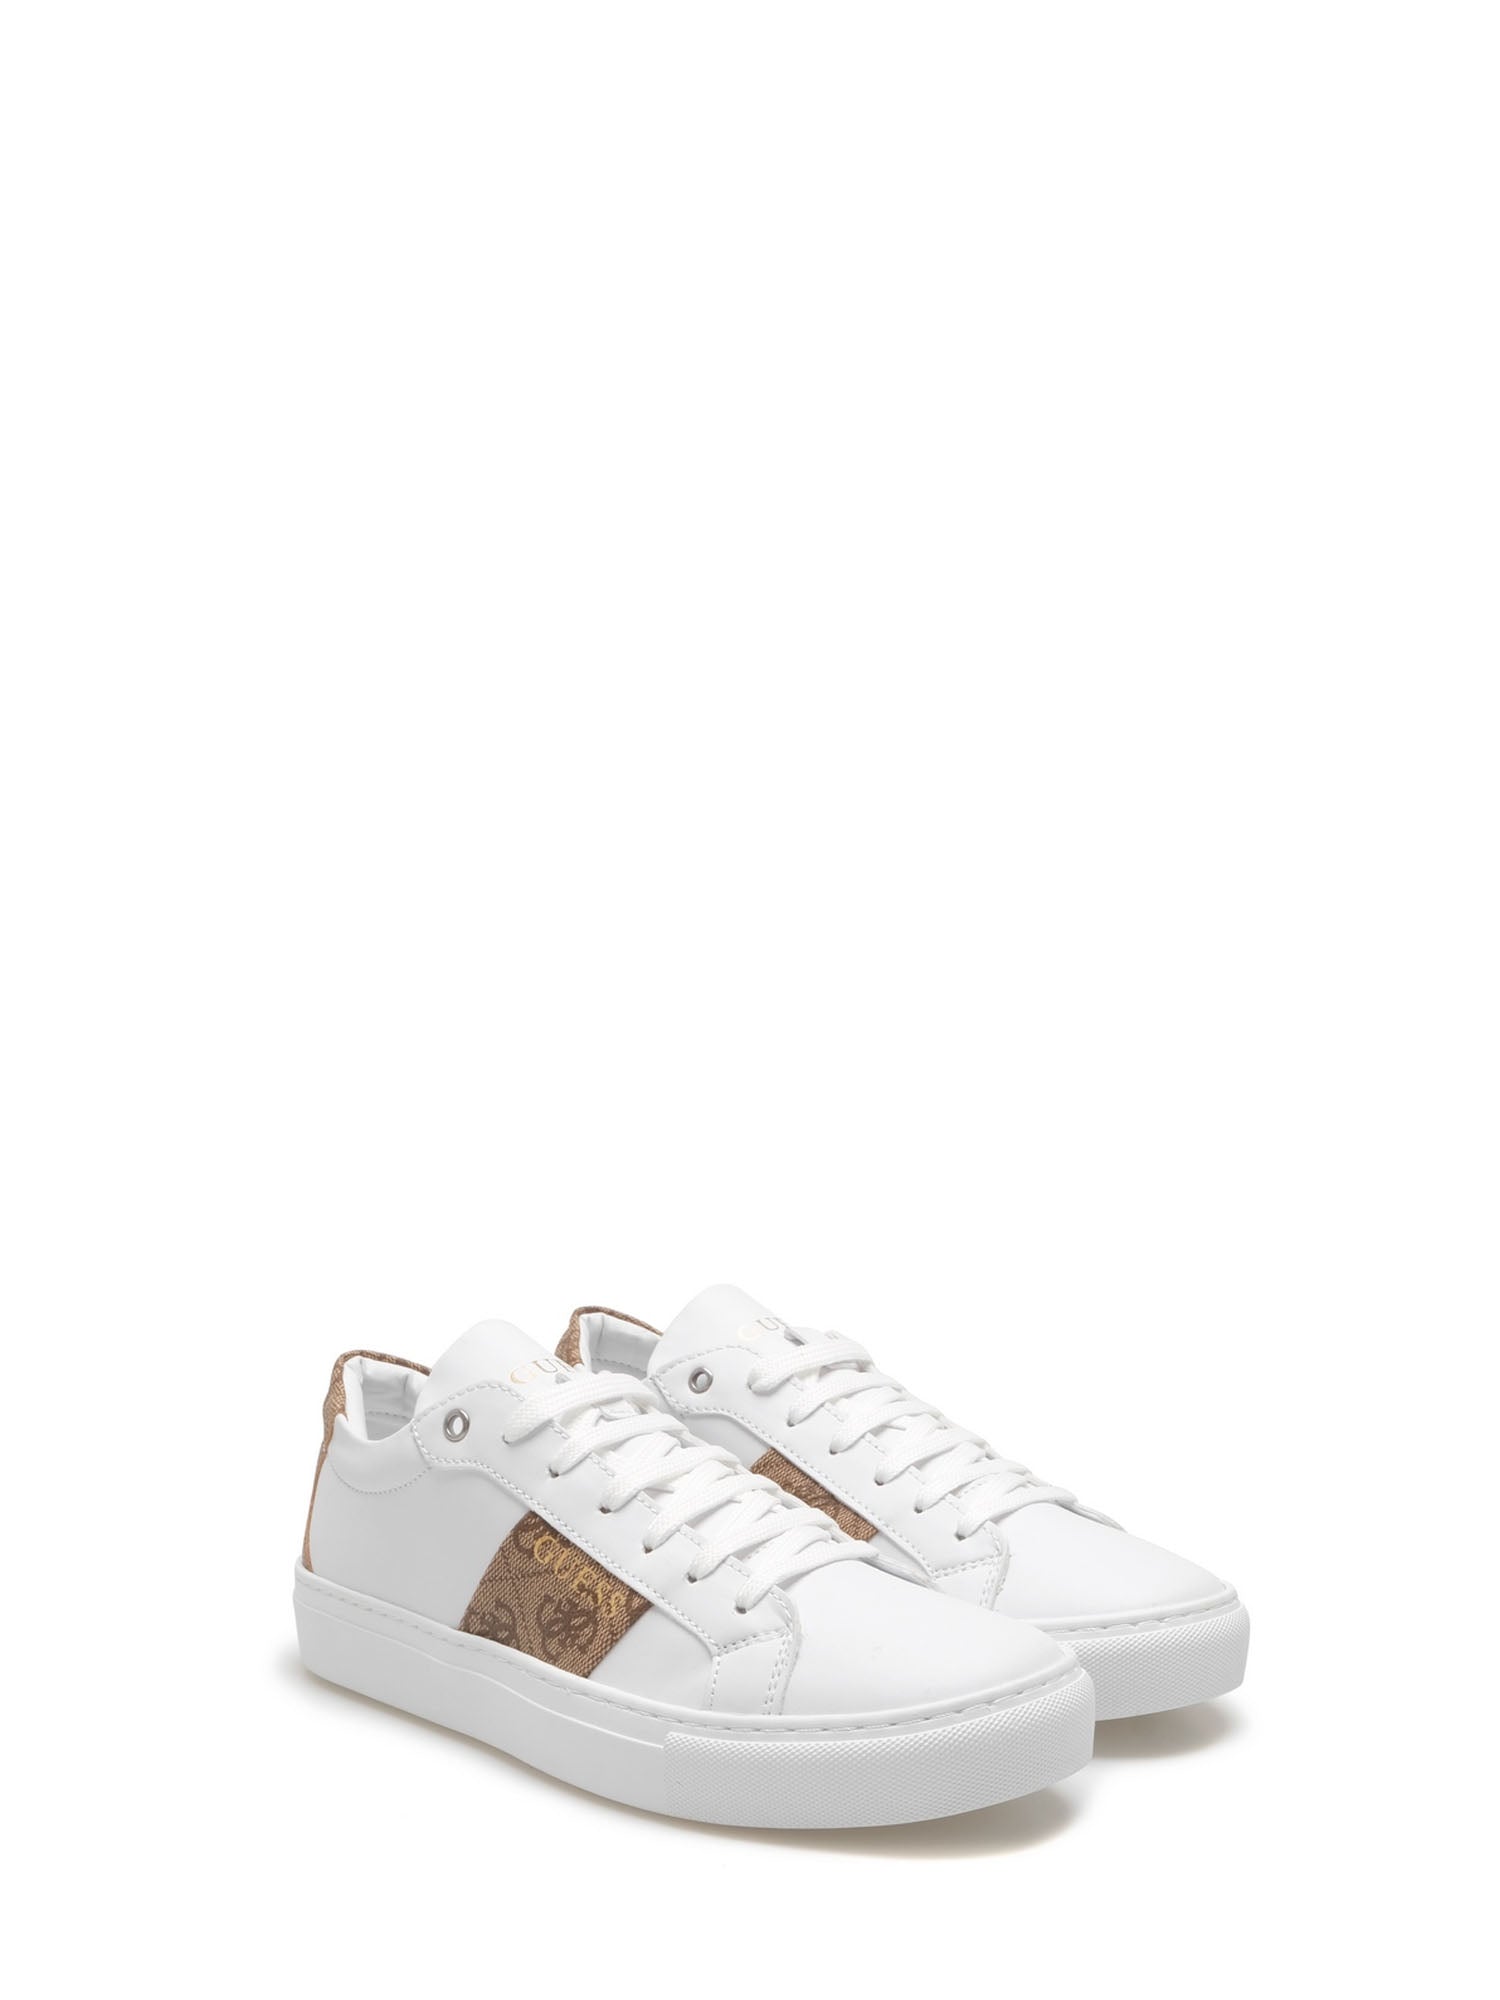 GUESS JEANS SNEAKERS TODA BIANCO-BEIGE